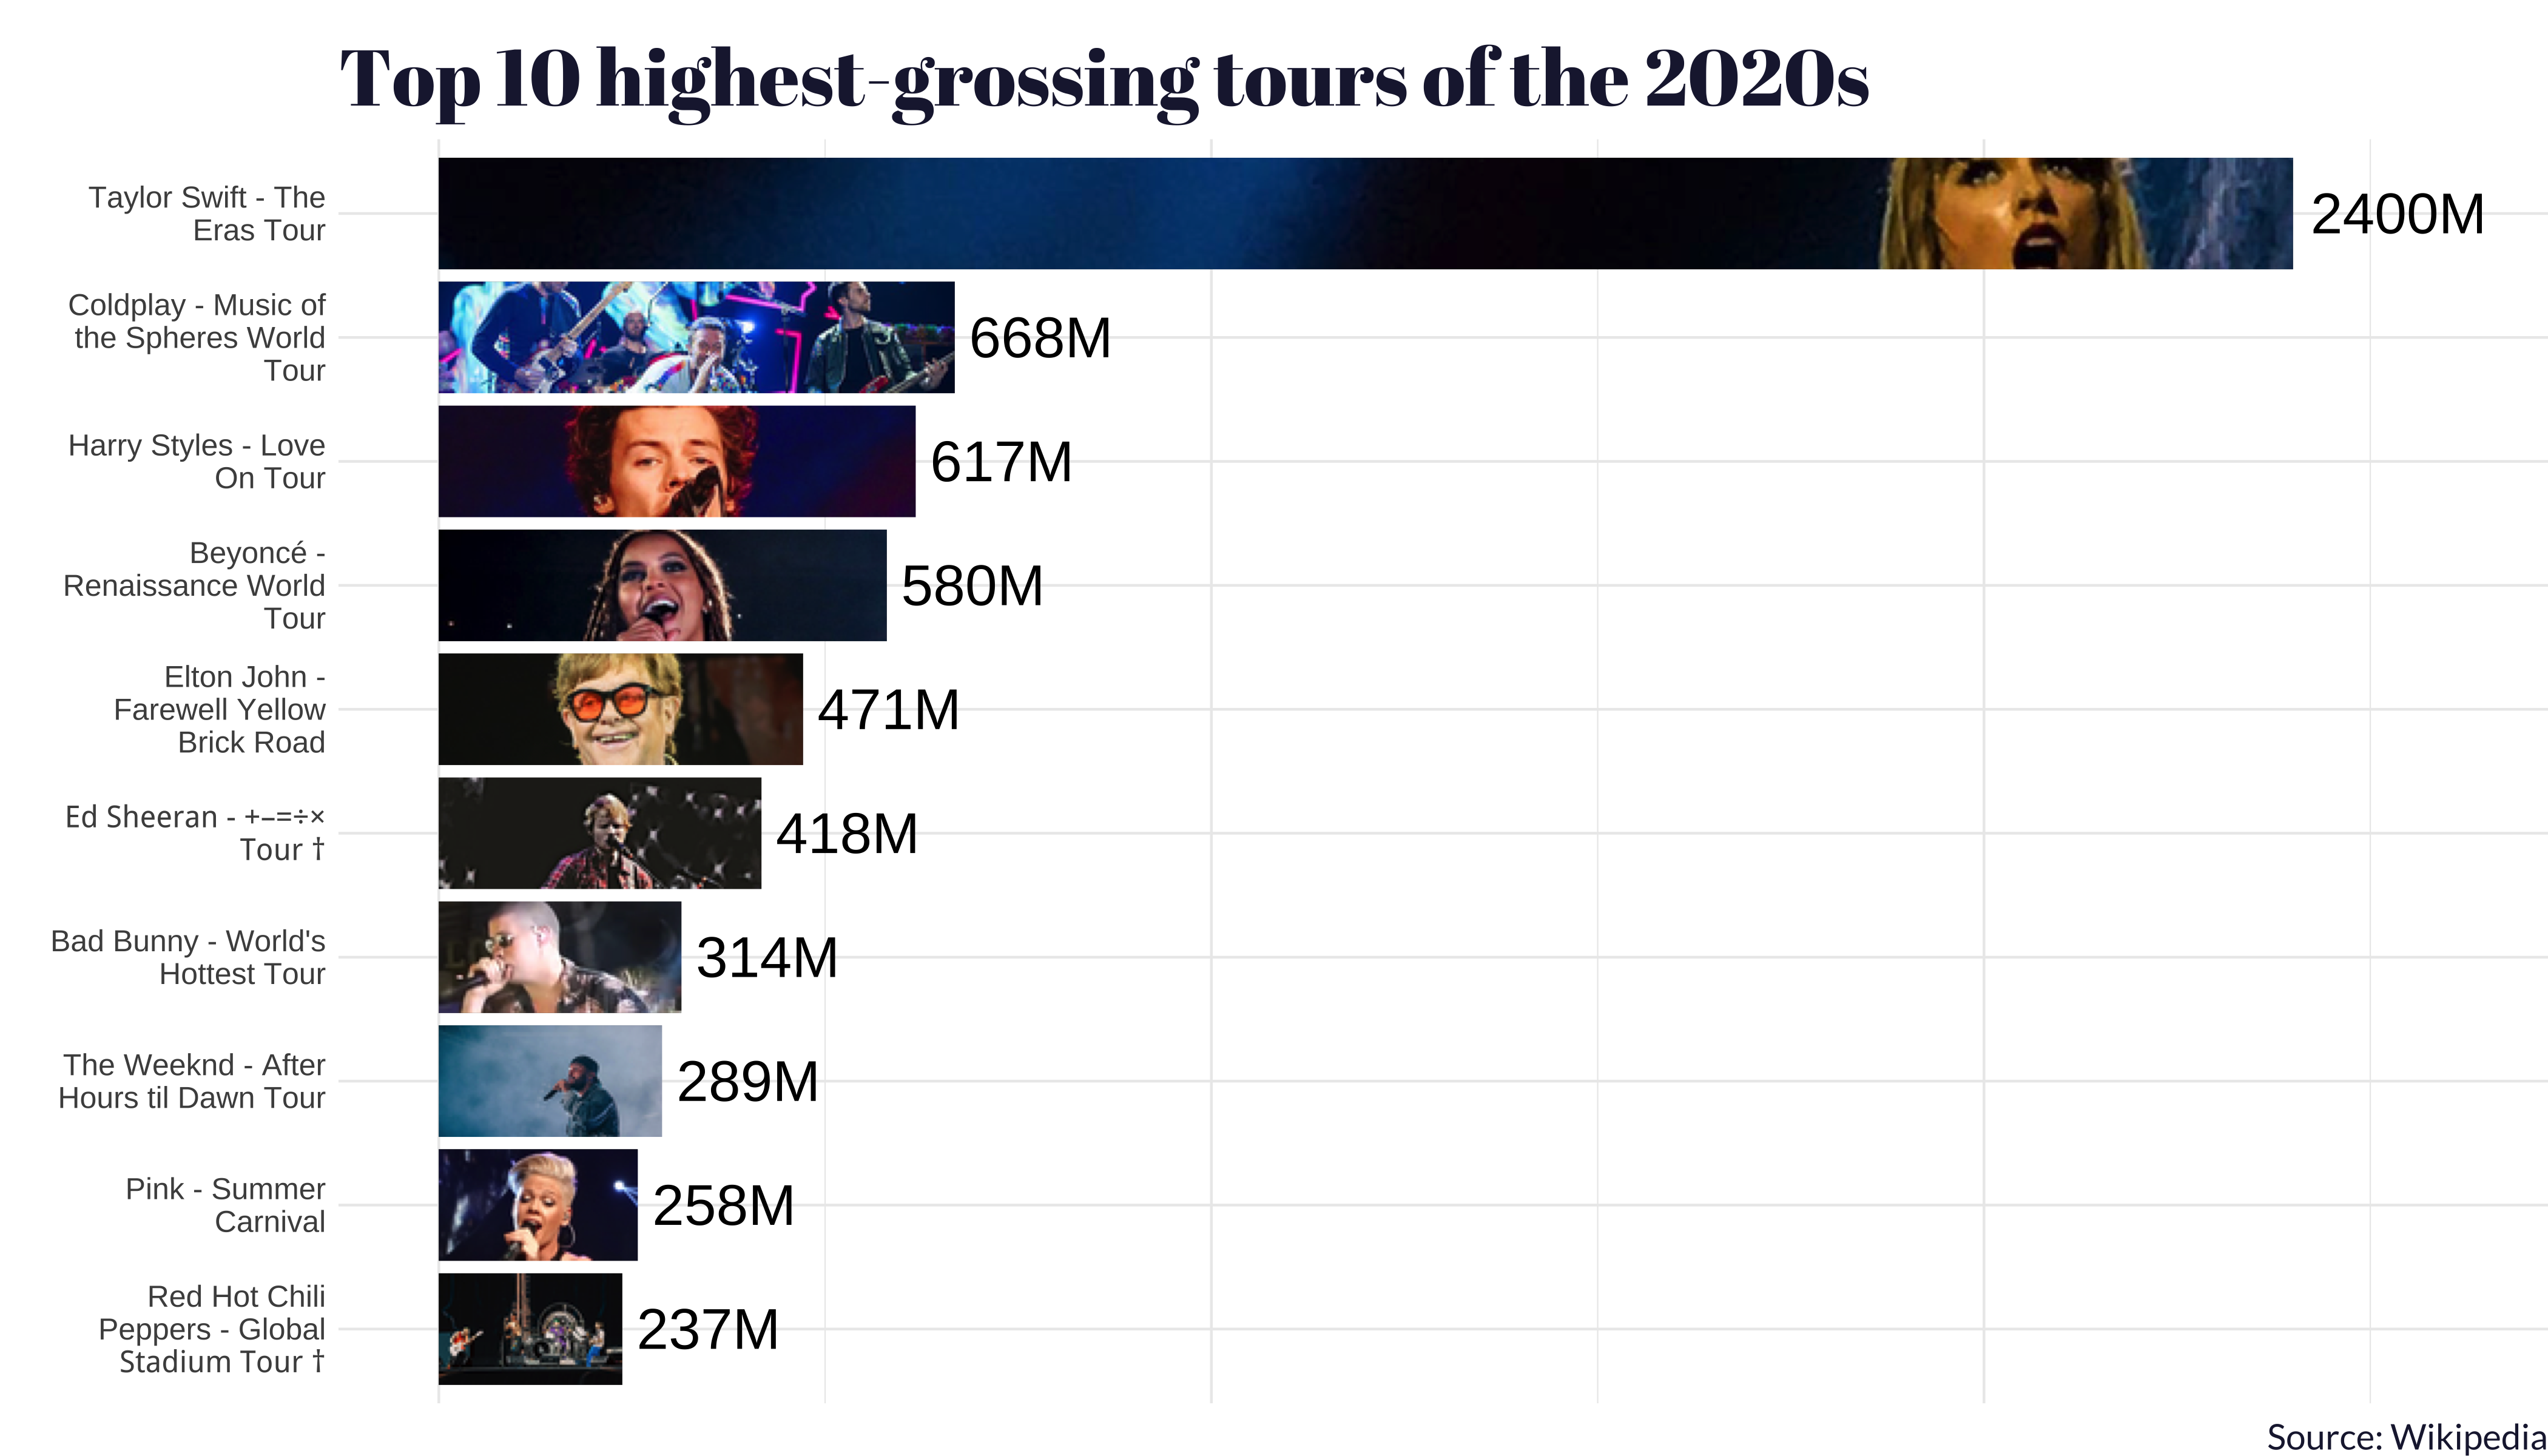 The image is a bar chart titled Top 10 highest-grossing tours of the 2020s with a white background. It lists musical tours from the 2020s with their corresponding revenue figures, each accompanied by a small image of the performing artist or band. From top to bottom, the tours and their revenues are: Taylor Swift - The Eras Tour: 2400, Coldplay - Music of the Spheres World Tour: 668, Harry Styles - Love On Tour: 617, Beyoncé - Renaissance World Tour: 580, Elton John - Farewell Yellow Brick Road: 471, Ed Sheeran - ÷=× Tour: 418, Bad Bunny - World's Hottest Tour: 314, The Weeknd - After Hours til Dawn Tour: 289, Pink - Summer Carnival: 258, Red Hot Chili Peppers - Global Stadium Tour: 237M. On the right side of each tour name and revenue, there is a corresponding photograph of the artist or band performing live. The source of the data is credited to Wikipedia at the bottom of the image.